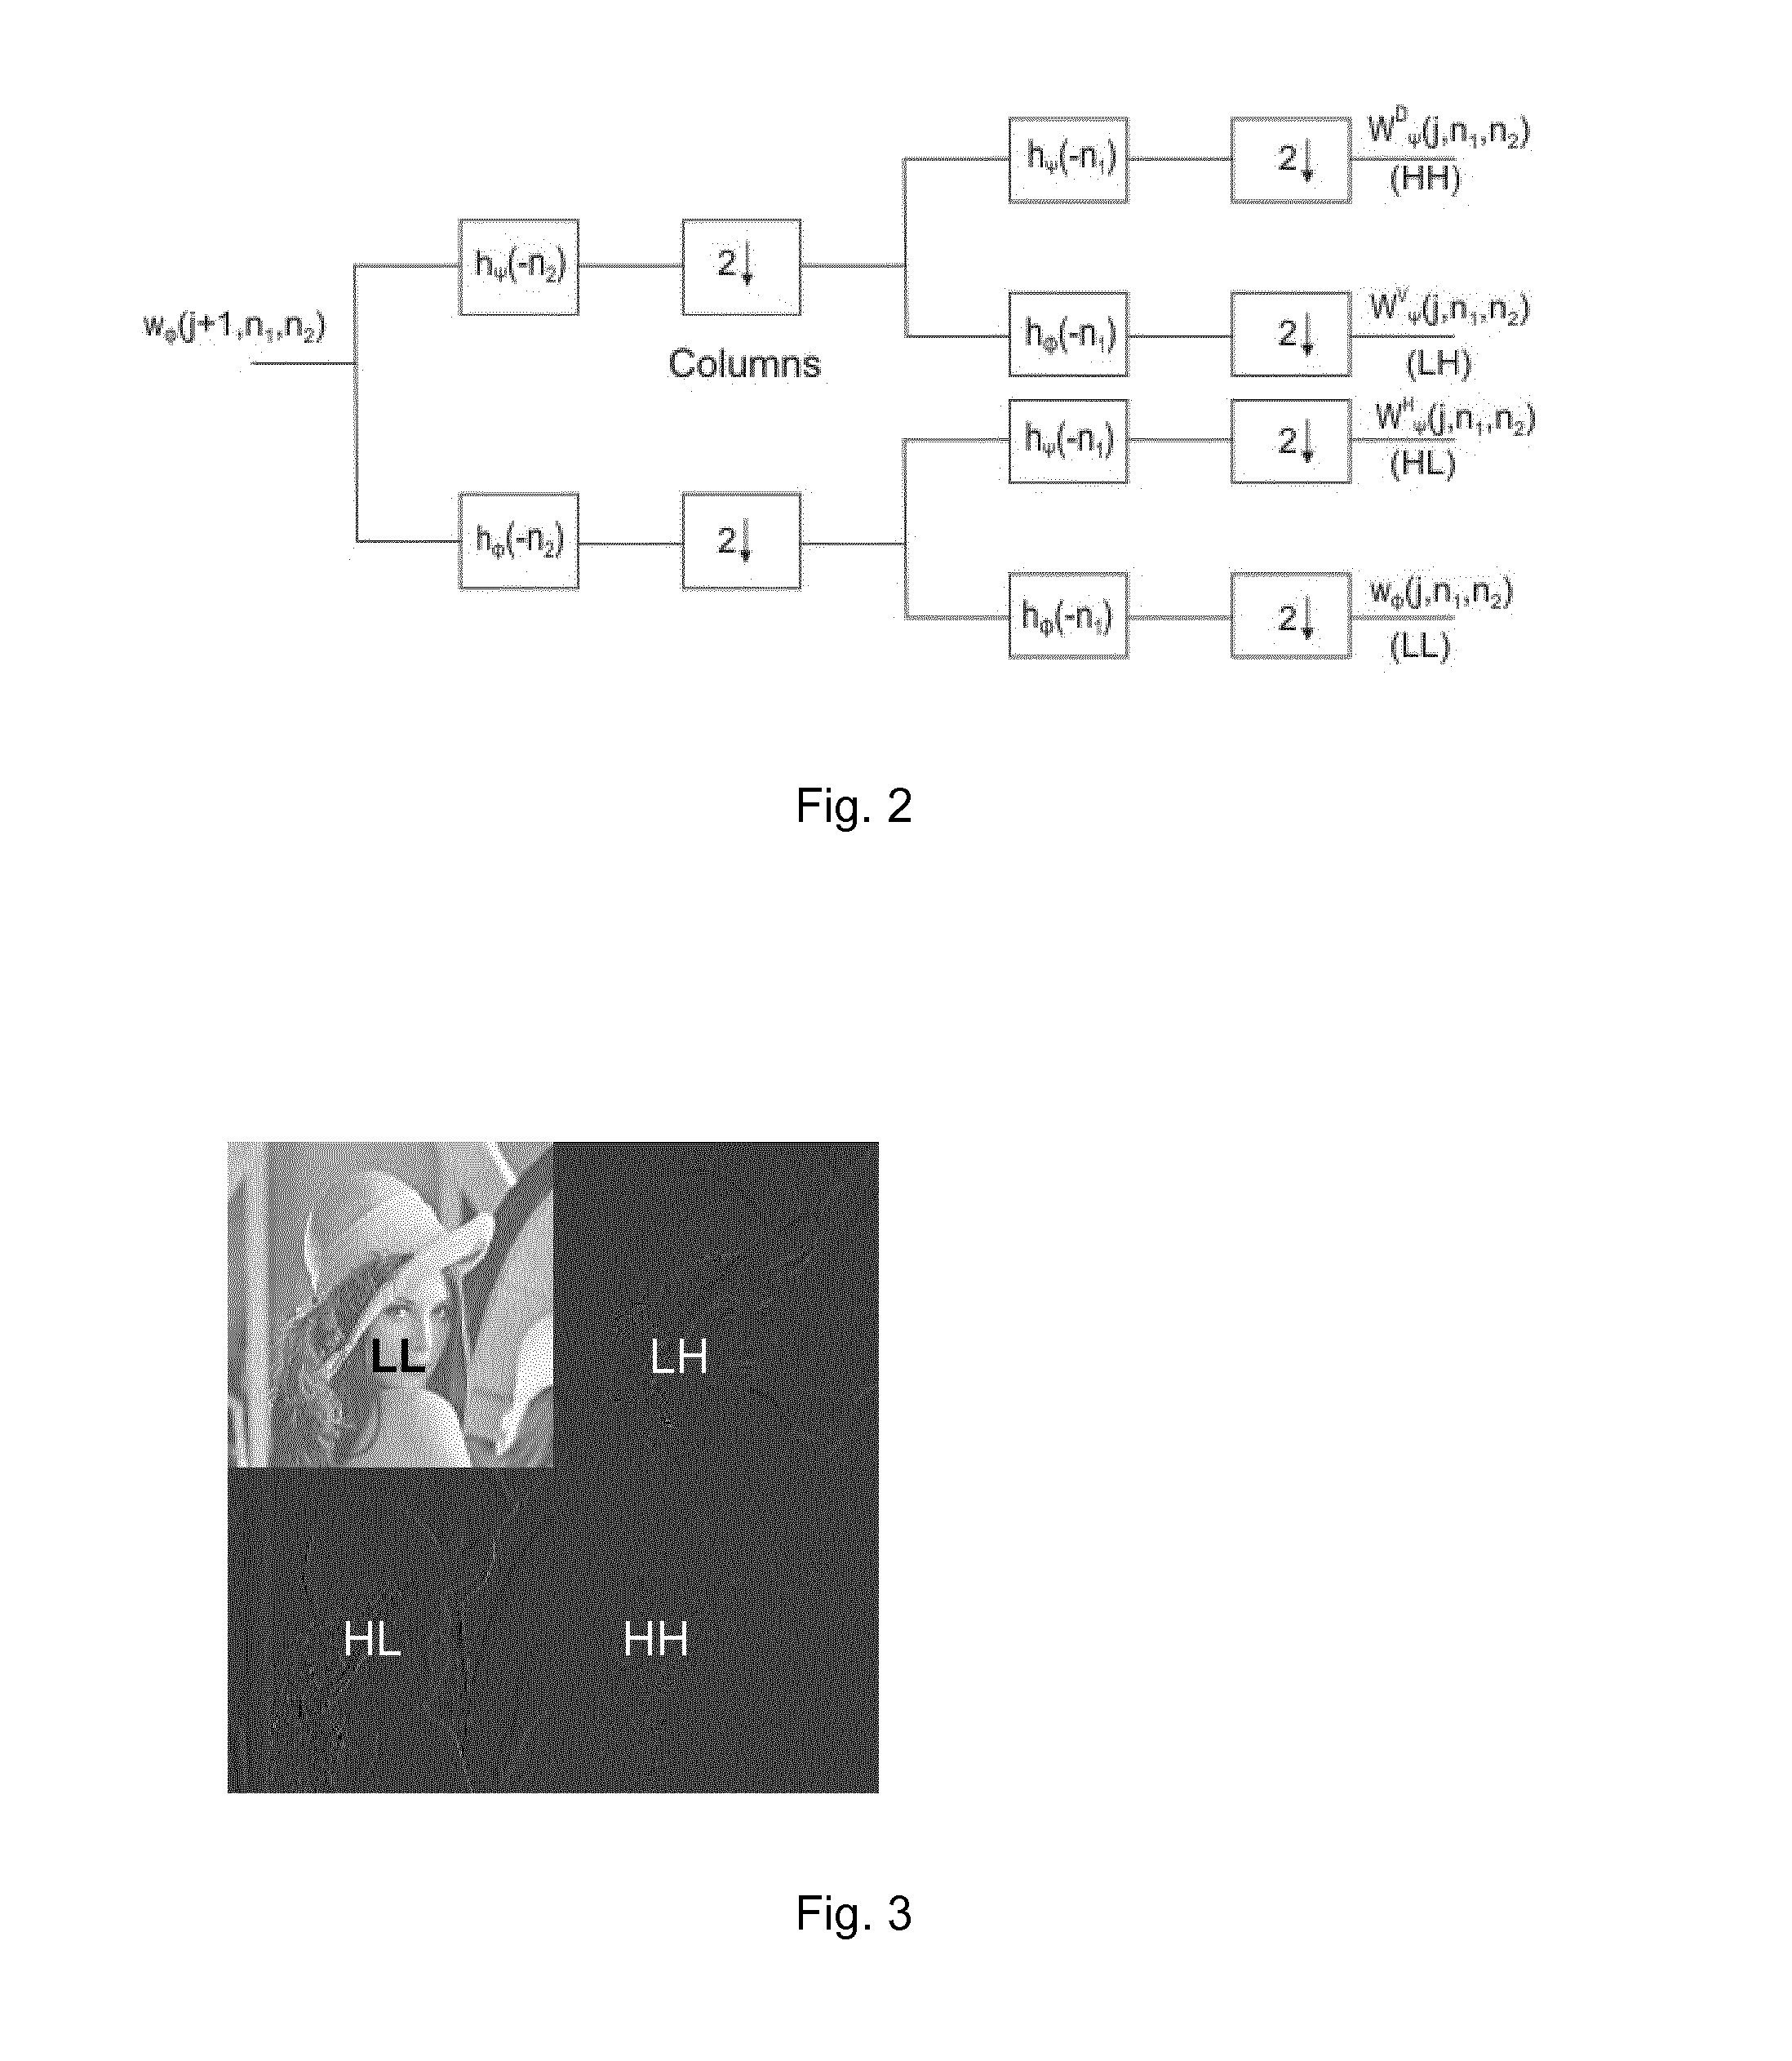 Method for inverse tone mapping of an image